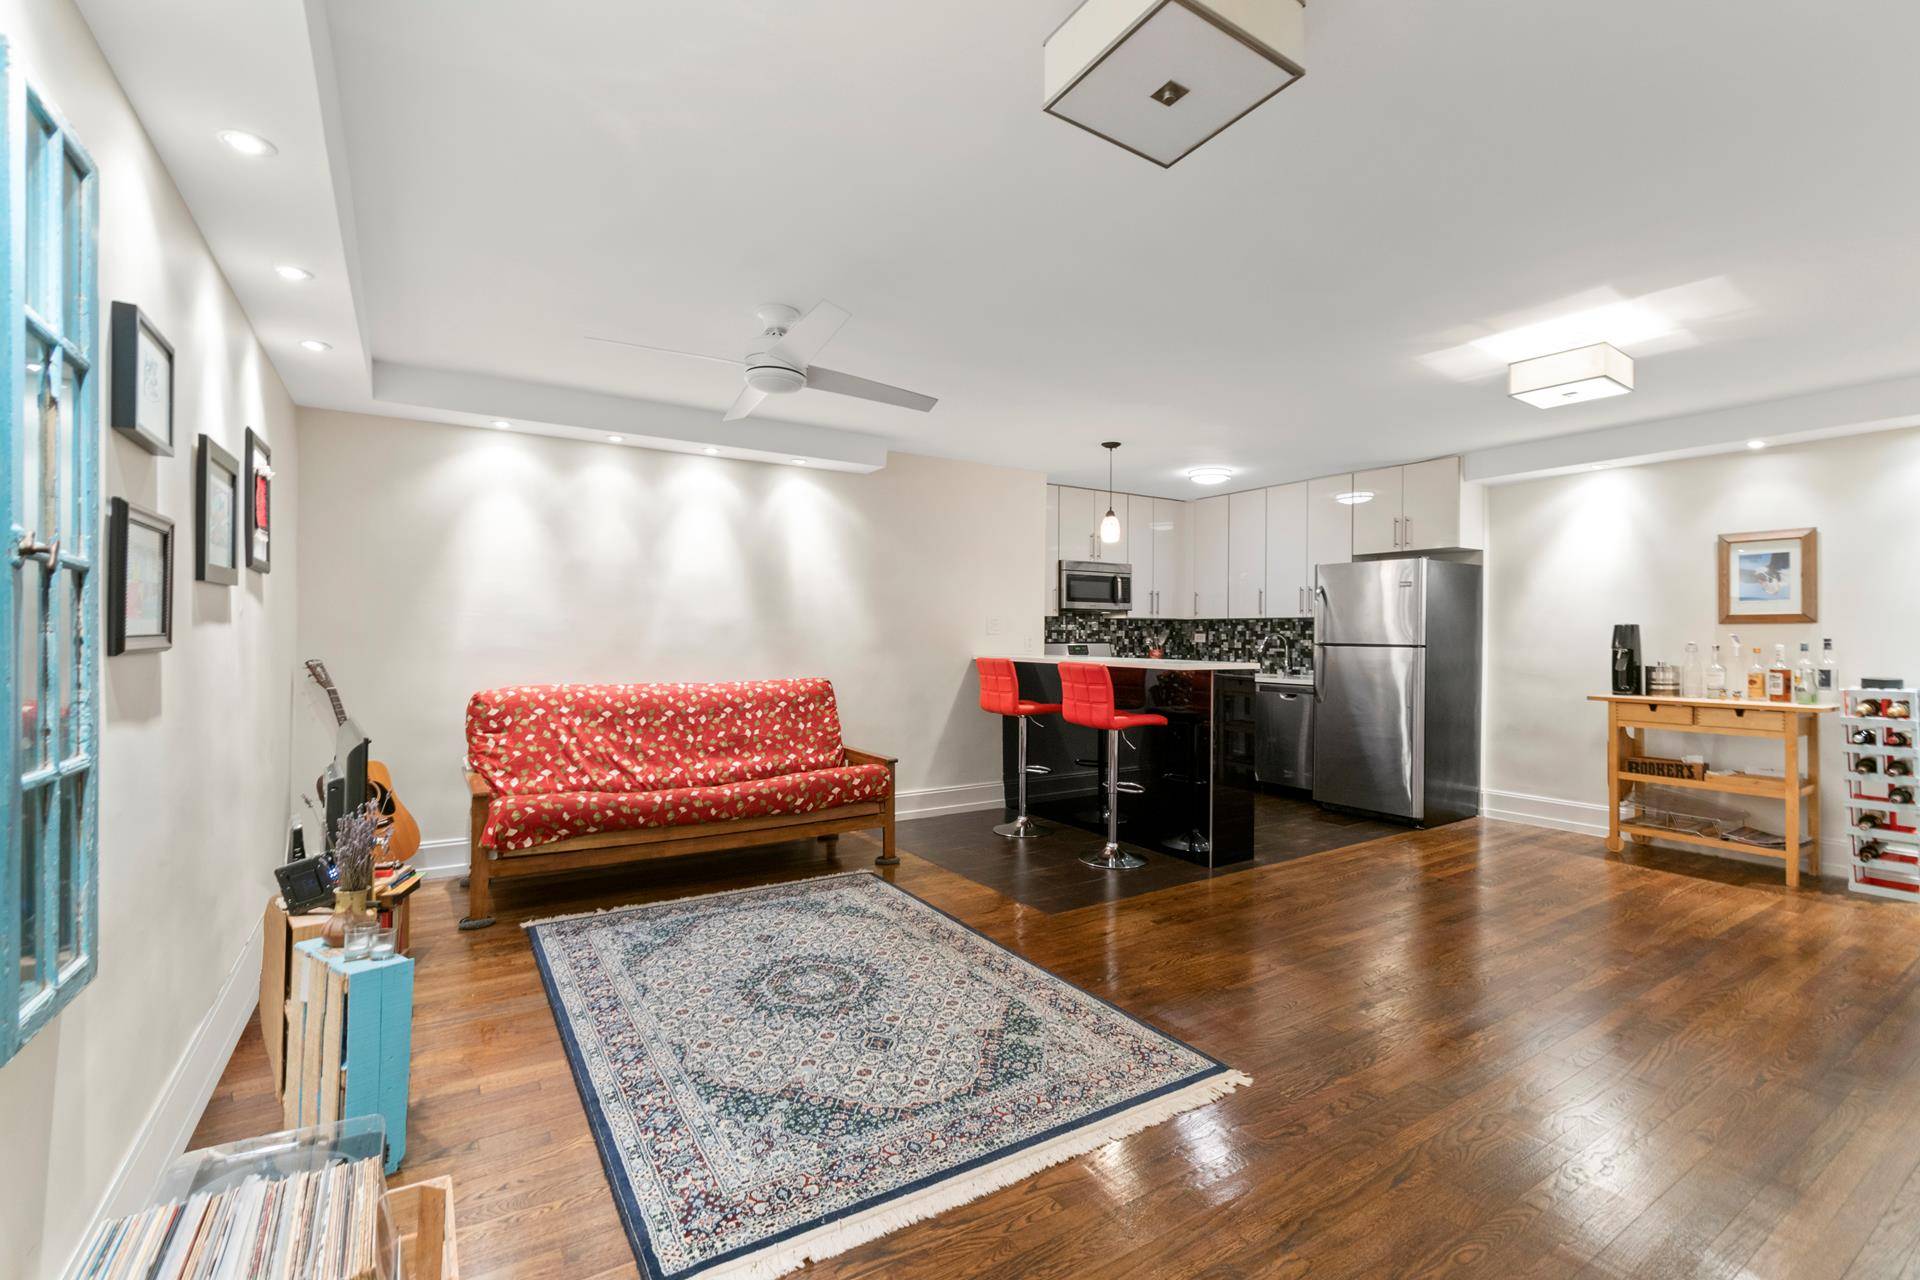 The Gentry Apartments located in Flatbush section of Brooklyn is a gated community with 24 7 security, laundry on every floor, pet friendly and on site super.